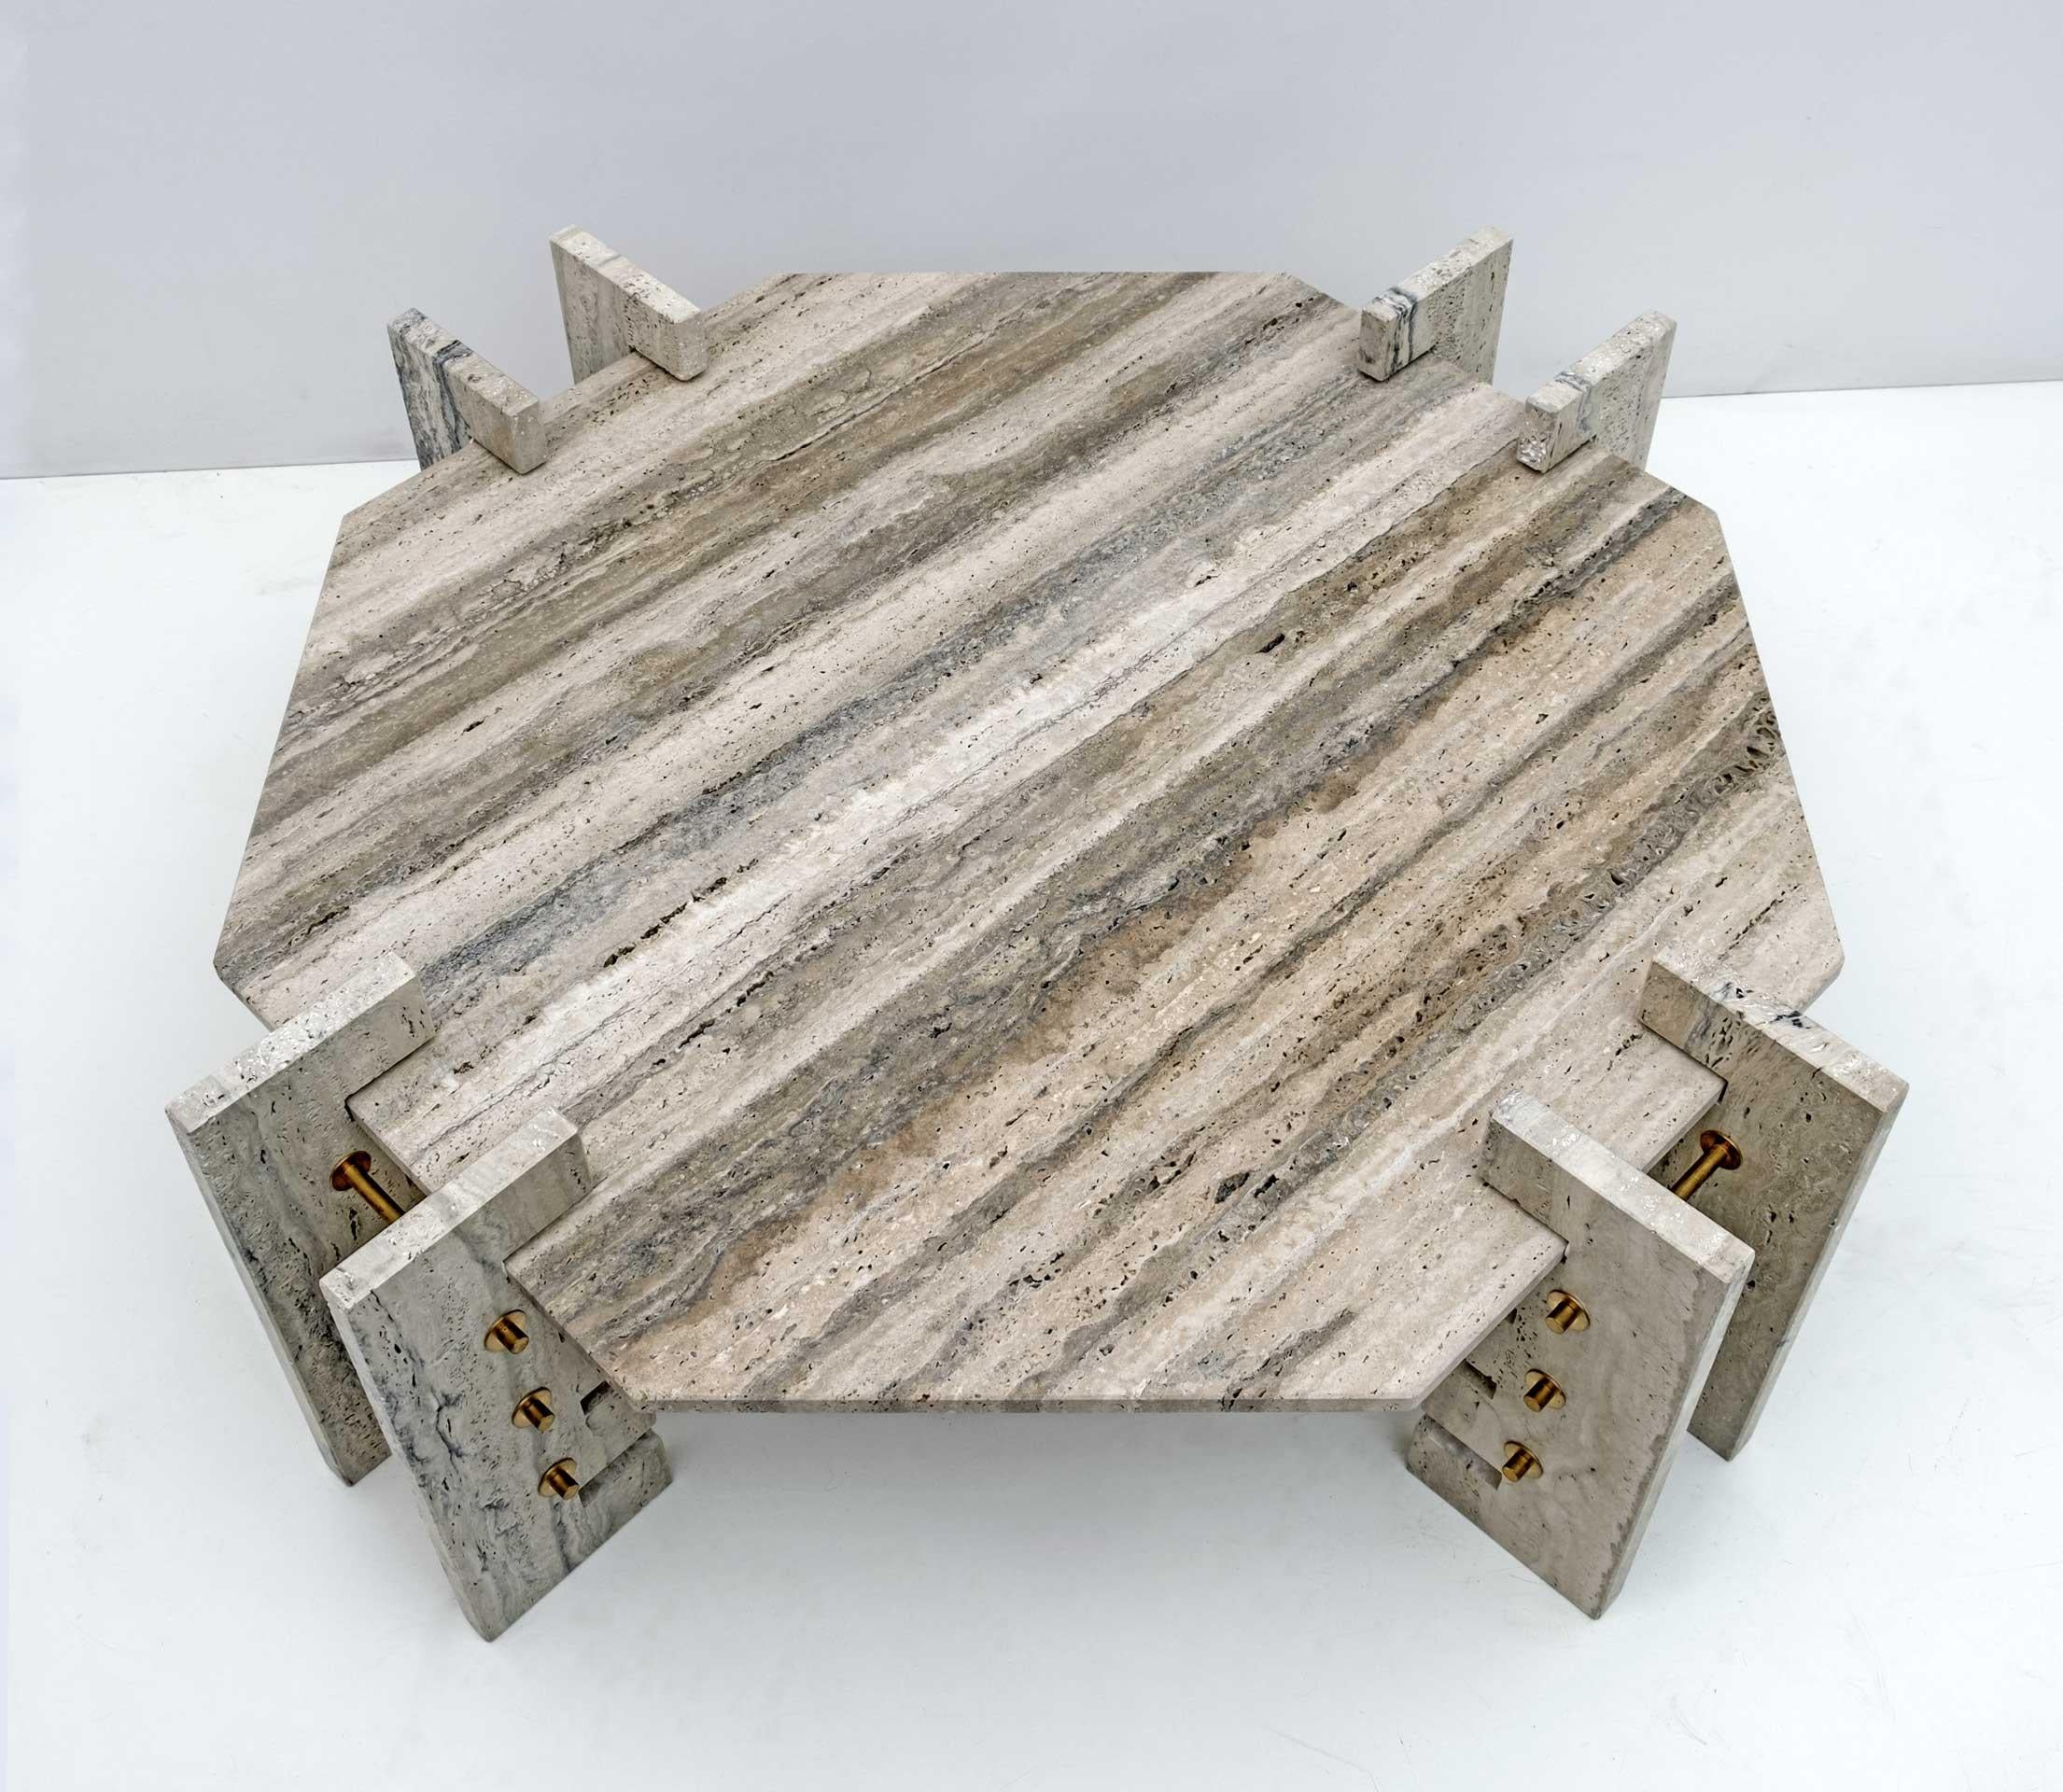 Particular octagonal table in Travertine with grooved bases to allow the lowering of the top, the table is mounted with brass bolts, with a minimalist shape, produced in the 70s, in perfect condition, as shown in the photos.